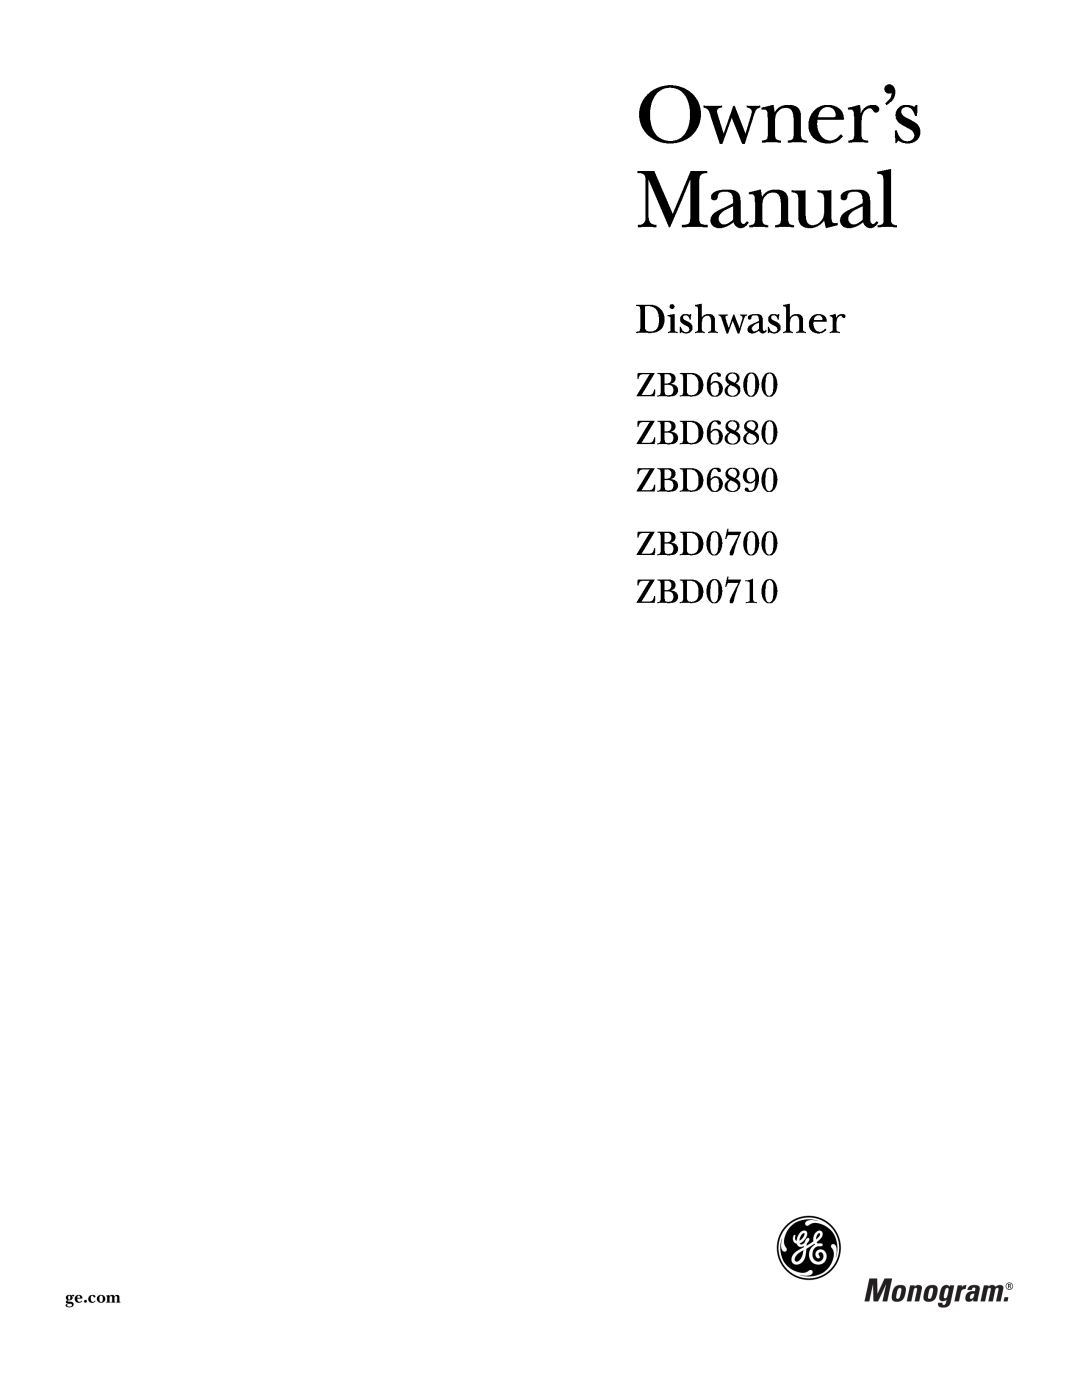 Cuisine-Cookware manual Owner’s Manual, Dishwasher, ZBD6800 ZBD6880 ZBD6890 ZBD0700 ZBD0710 